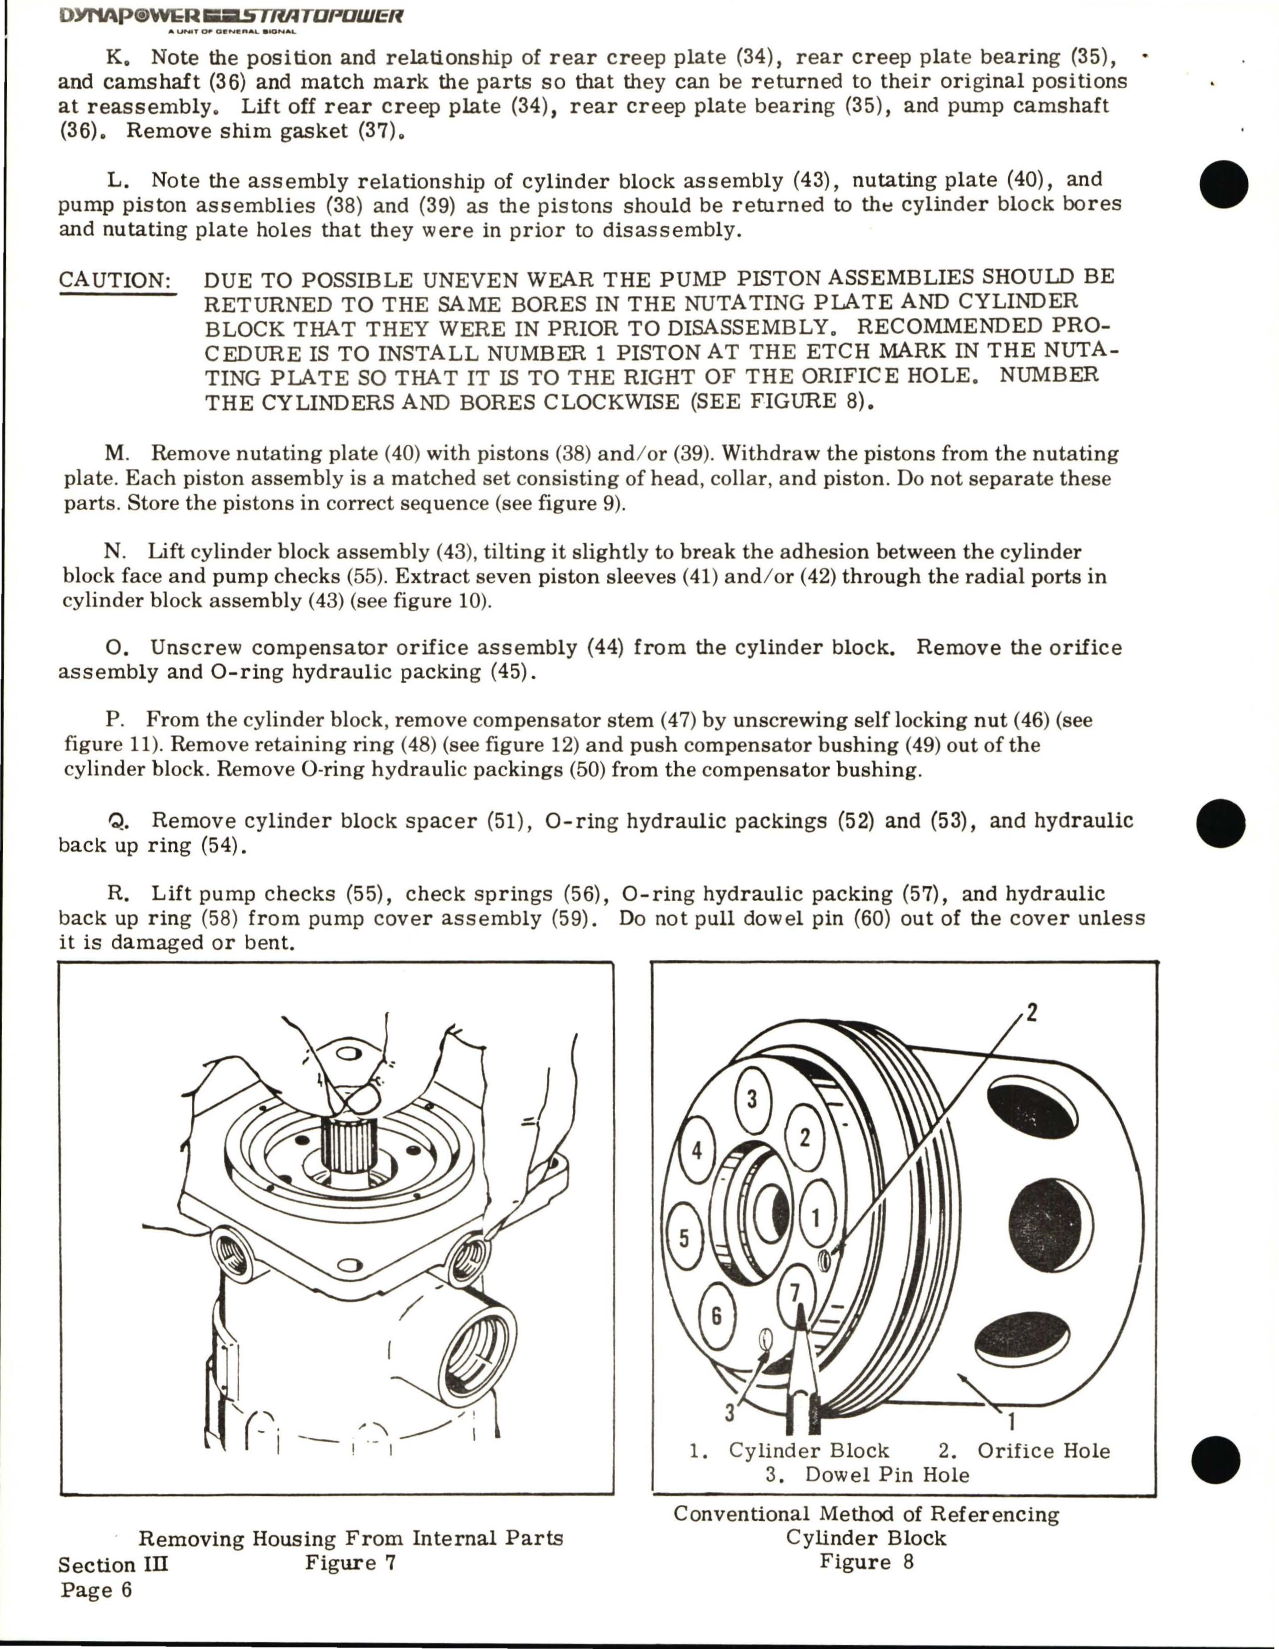 Sample page 6 from AirCorps Library document: Overhaul Instructions with Parts Breakdown for Stratopower Hydraulic Pump - 65W Series 